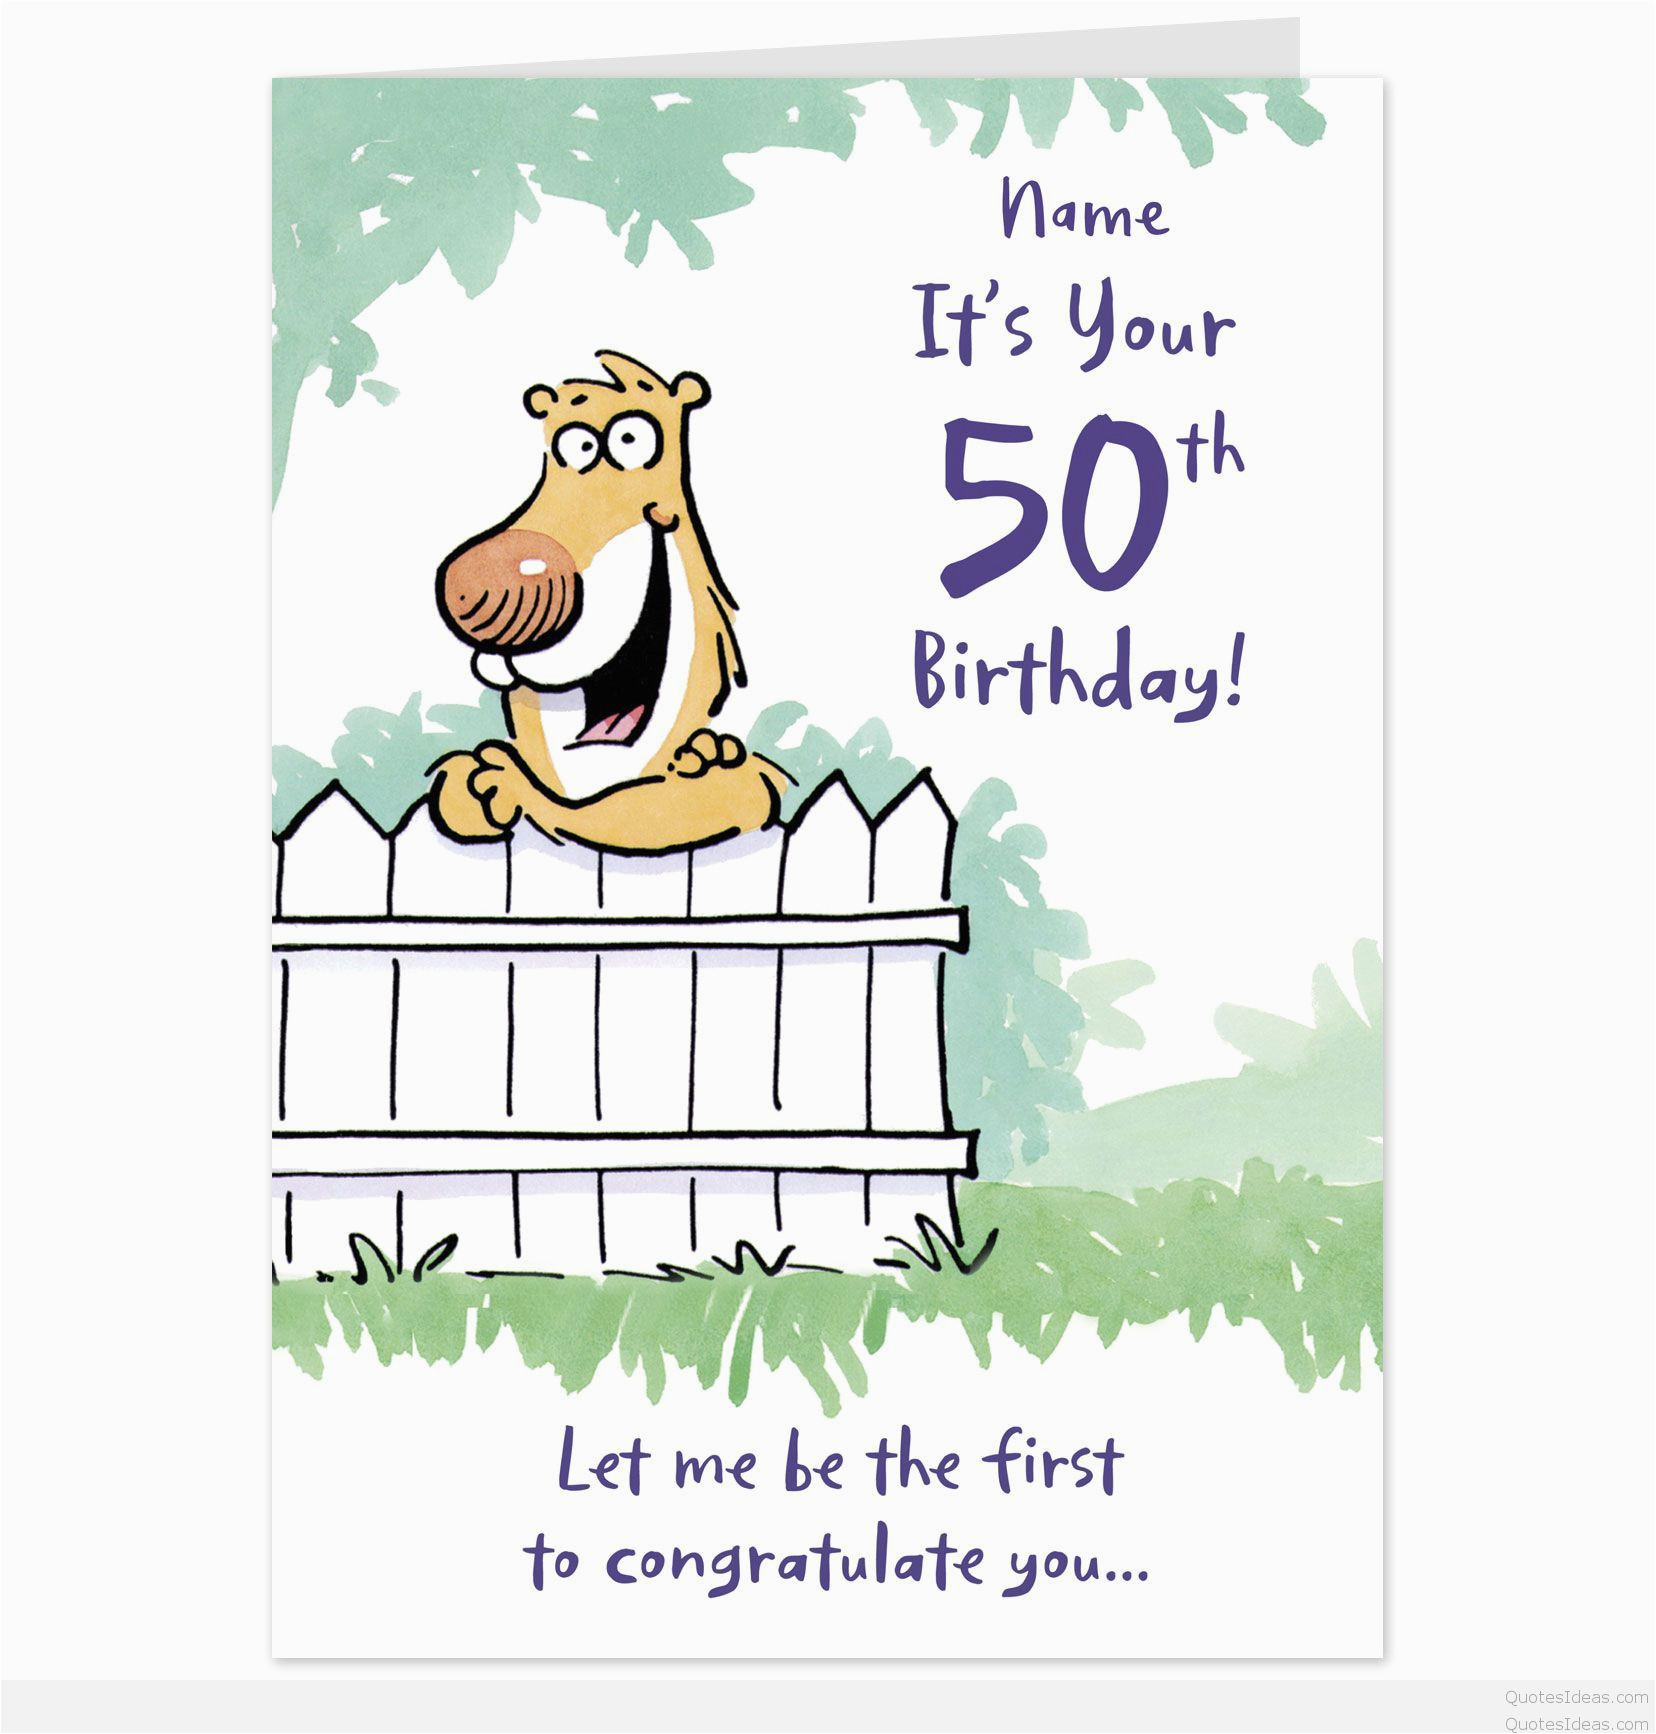 Funny Birthday Wishes Friend
 Funny Birthday Card Verses for Friends